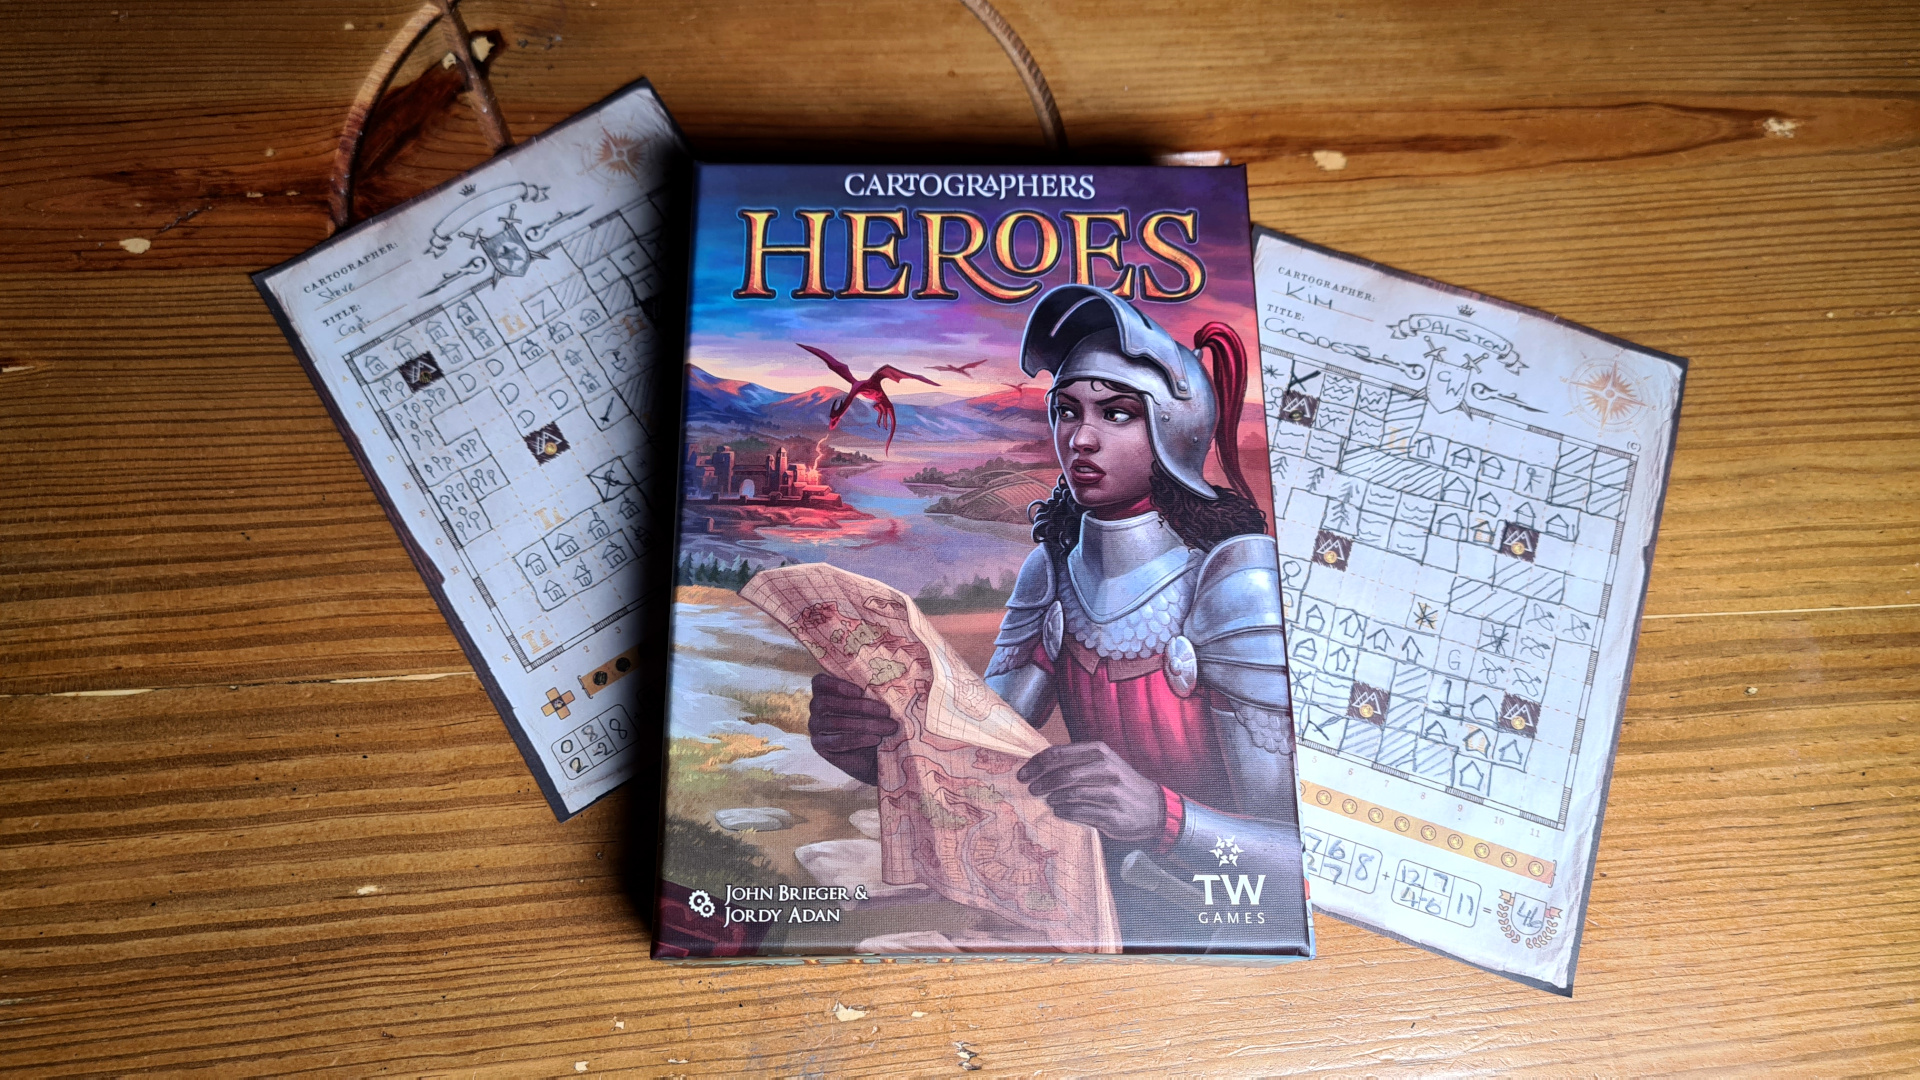 Cartographers Heroes Review